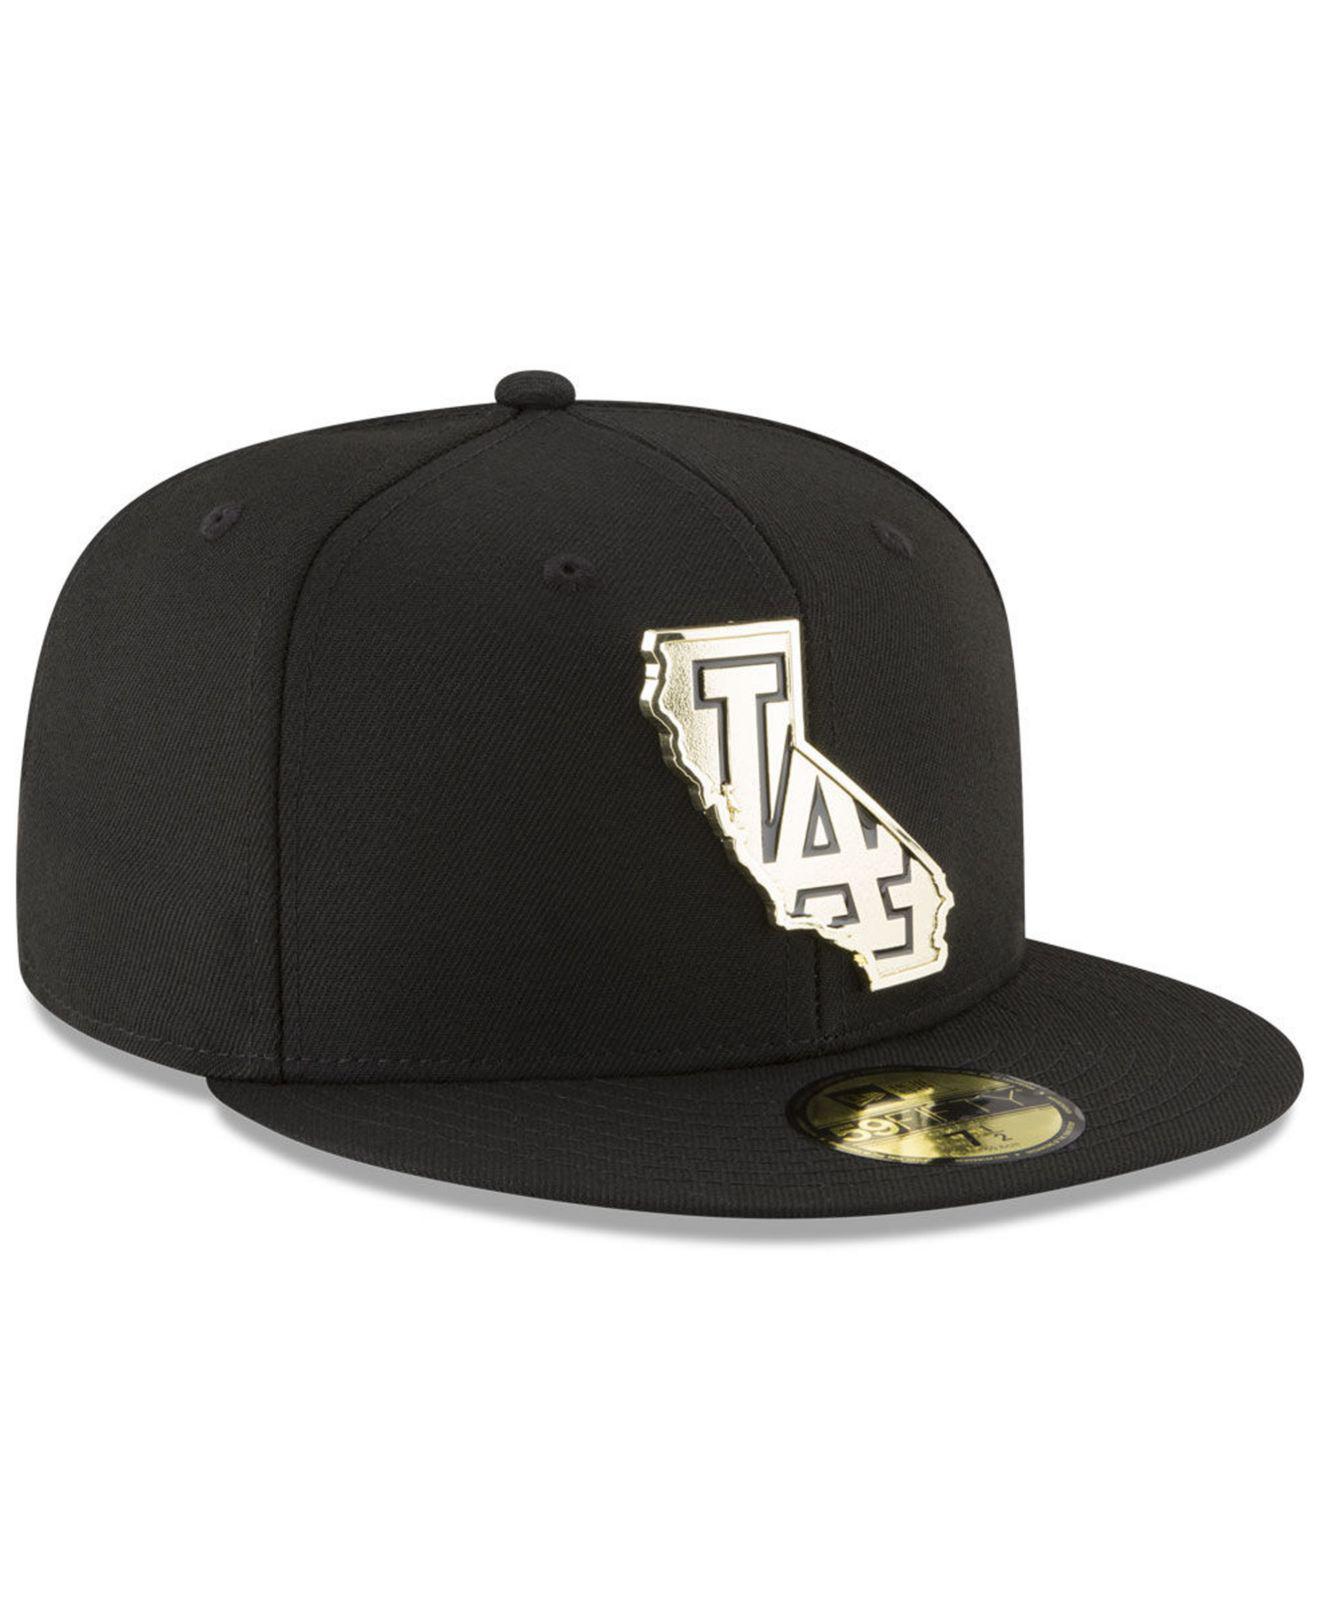 KTZ Los Angeles Dodgers Gold Stated 59fifty Fitted Cap in Black